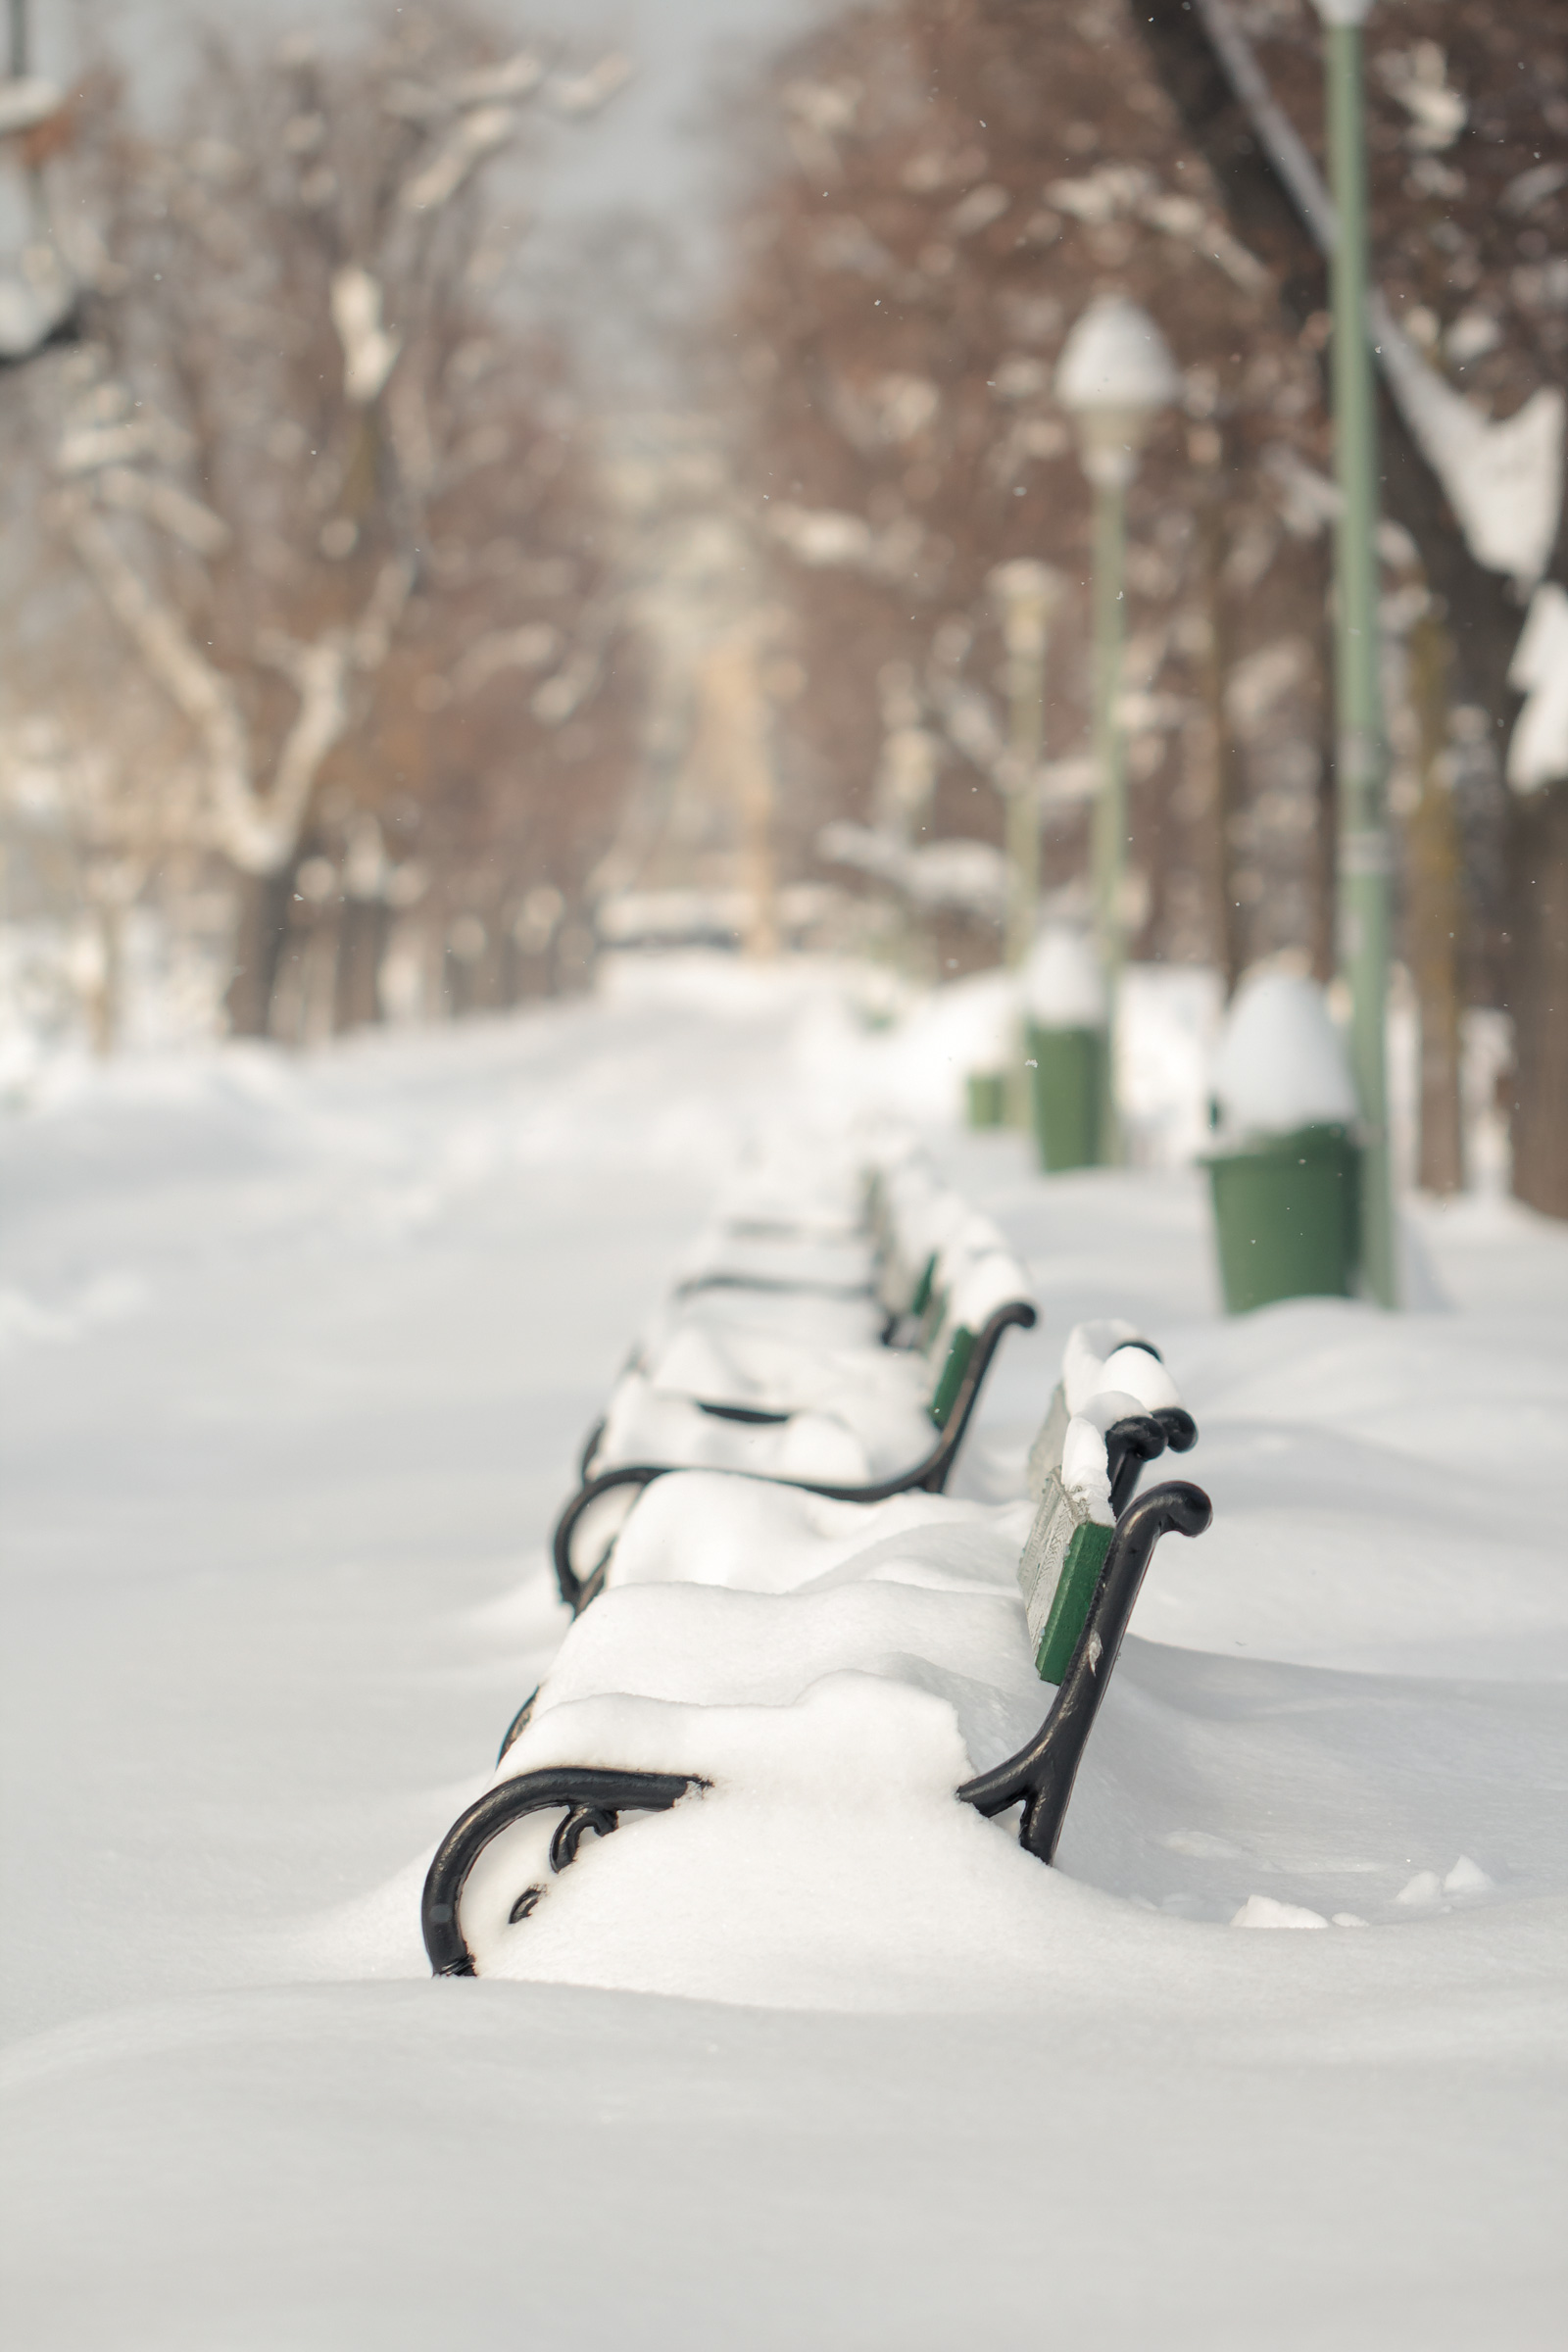 Winter scene with a snow covered bench in a city park